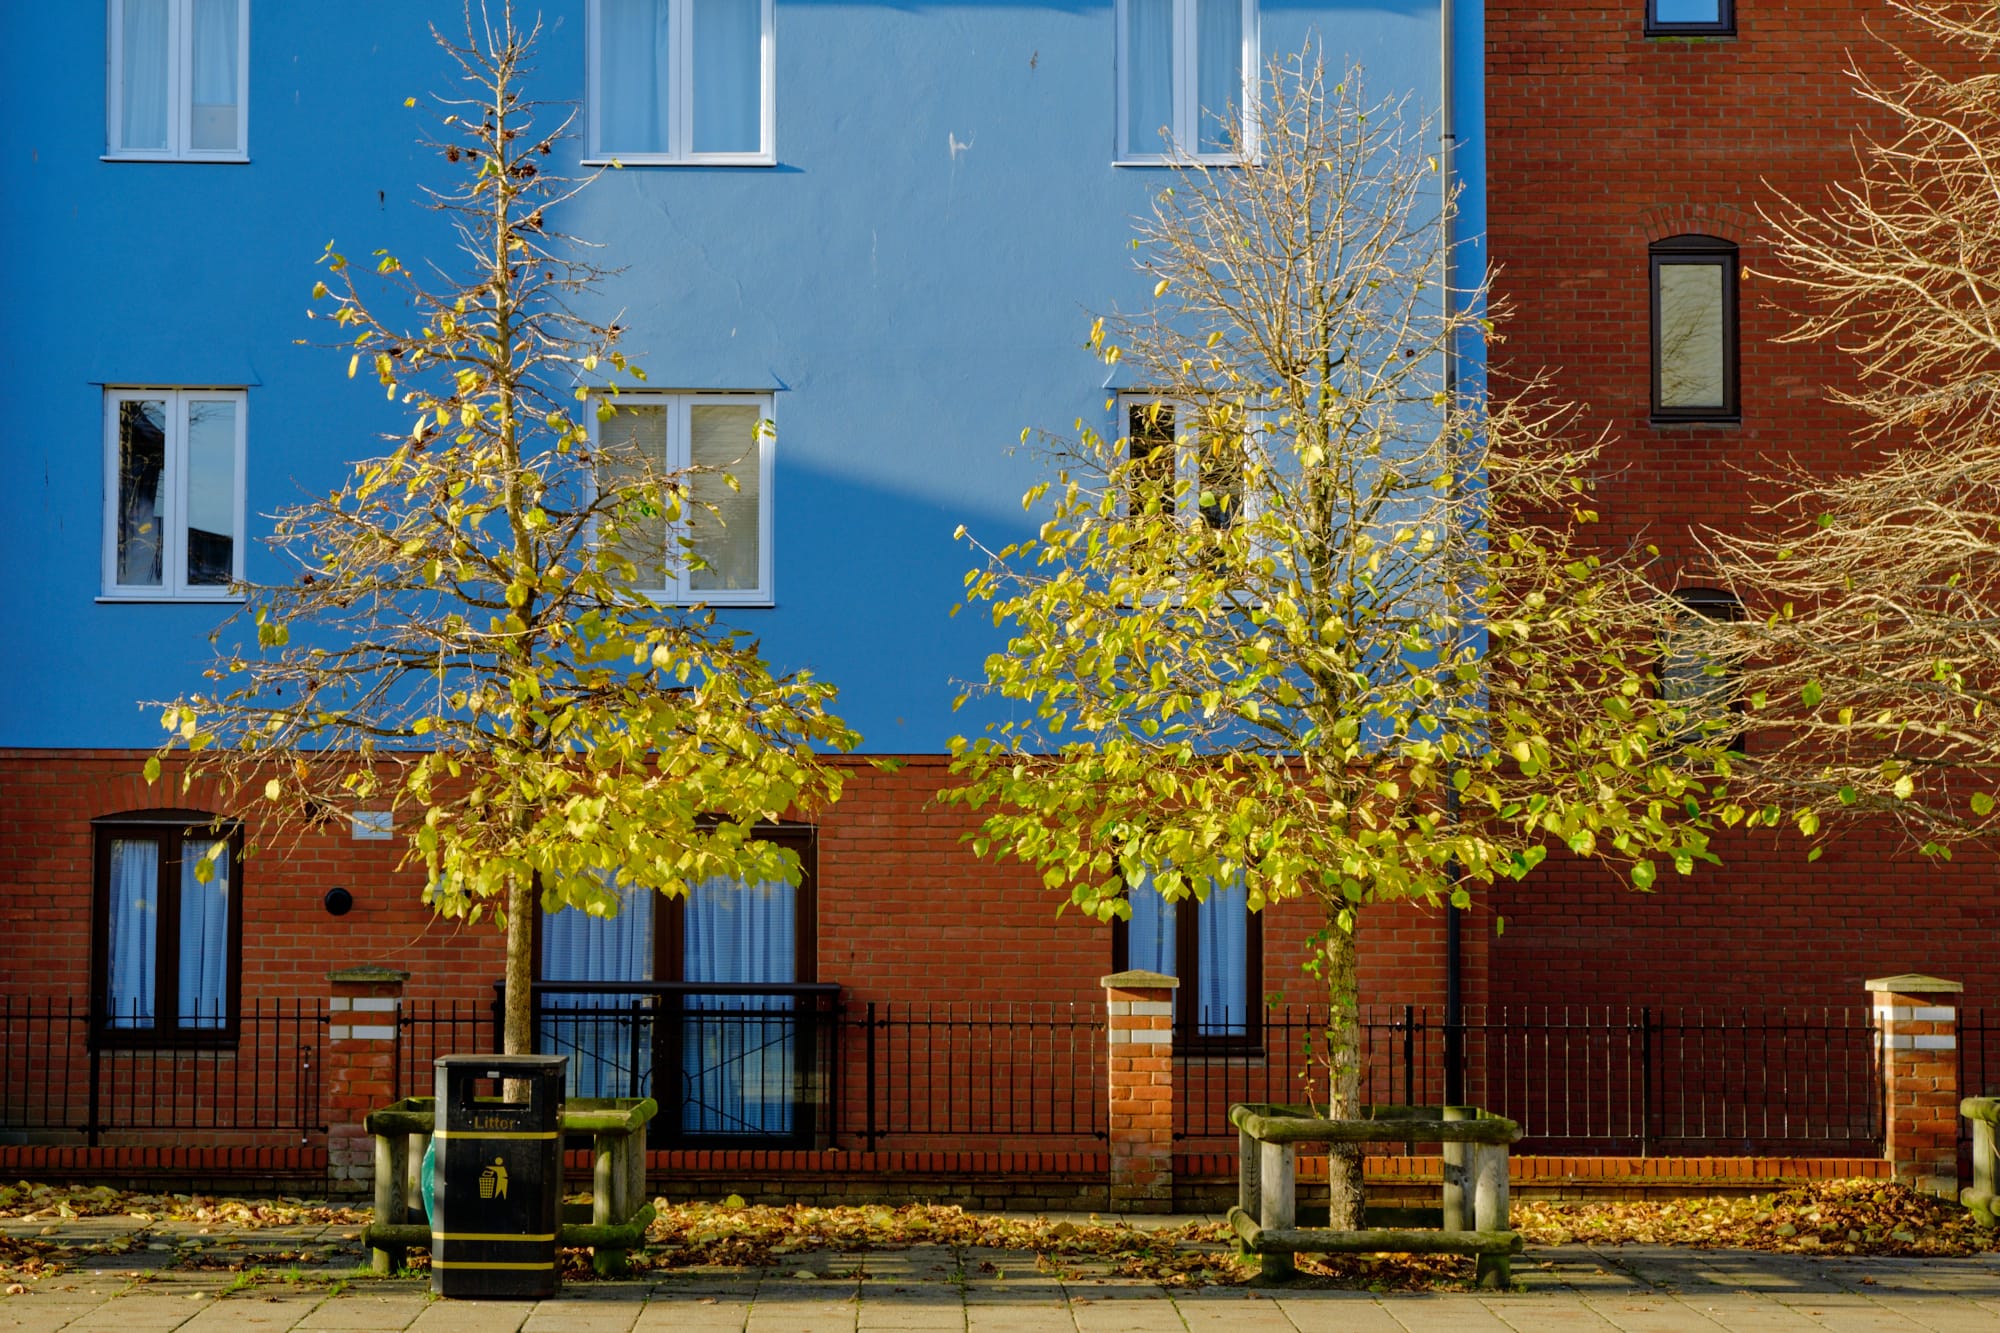 green and yellow trees against blue and red walls